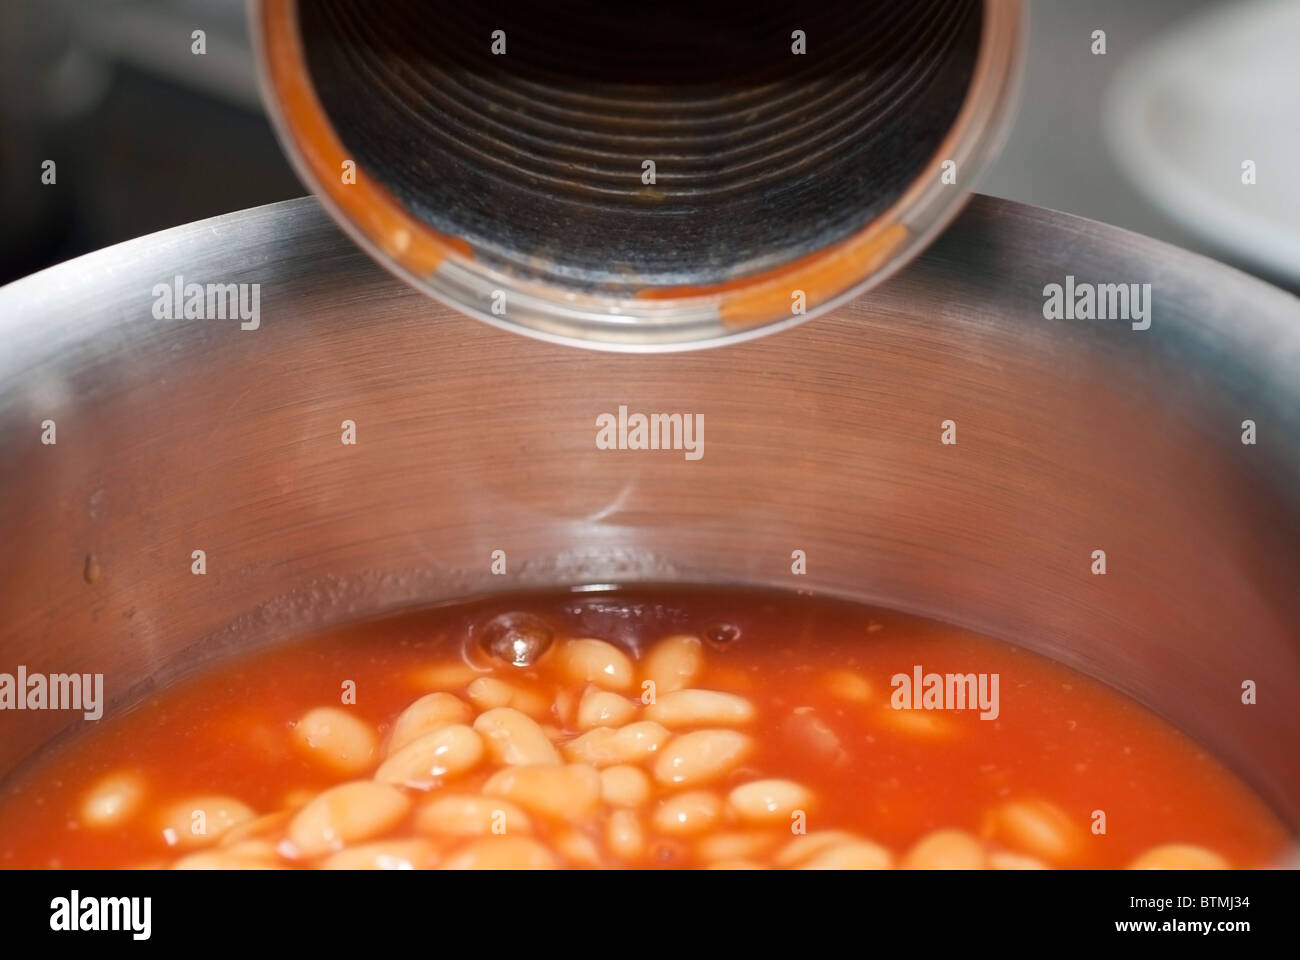 Emptied Baked Beans Can with Beans in Saucepan Stock Photo